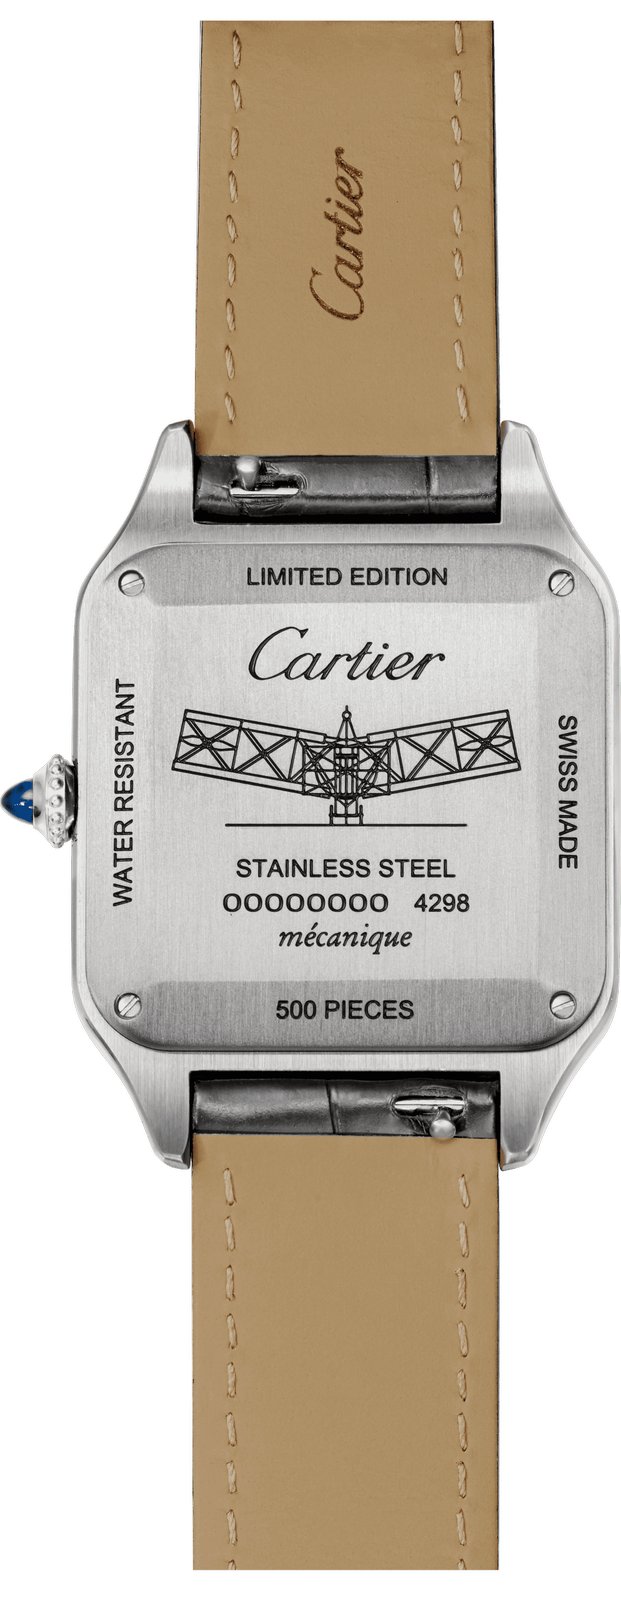 limited edition cartier